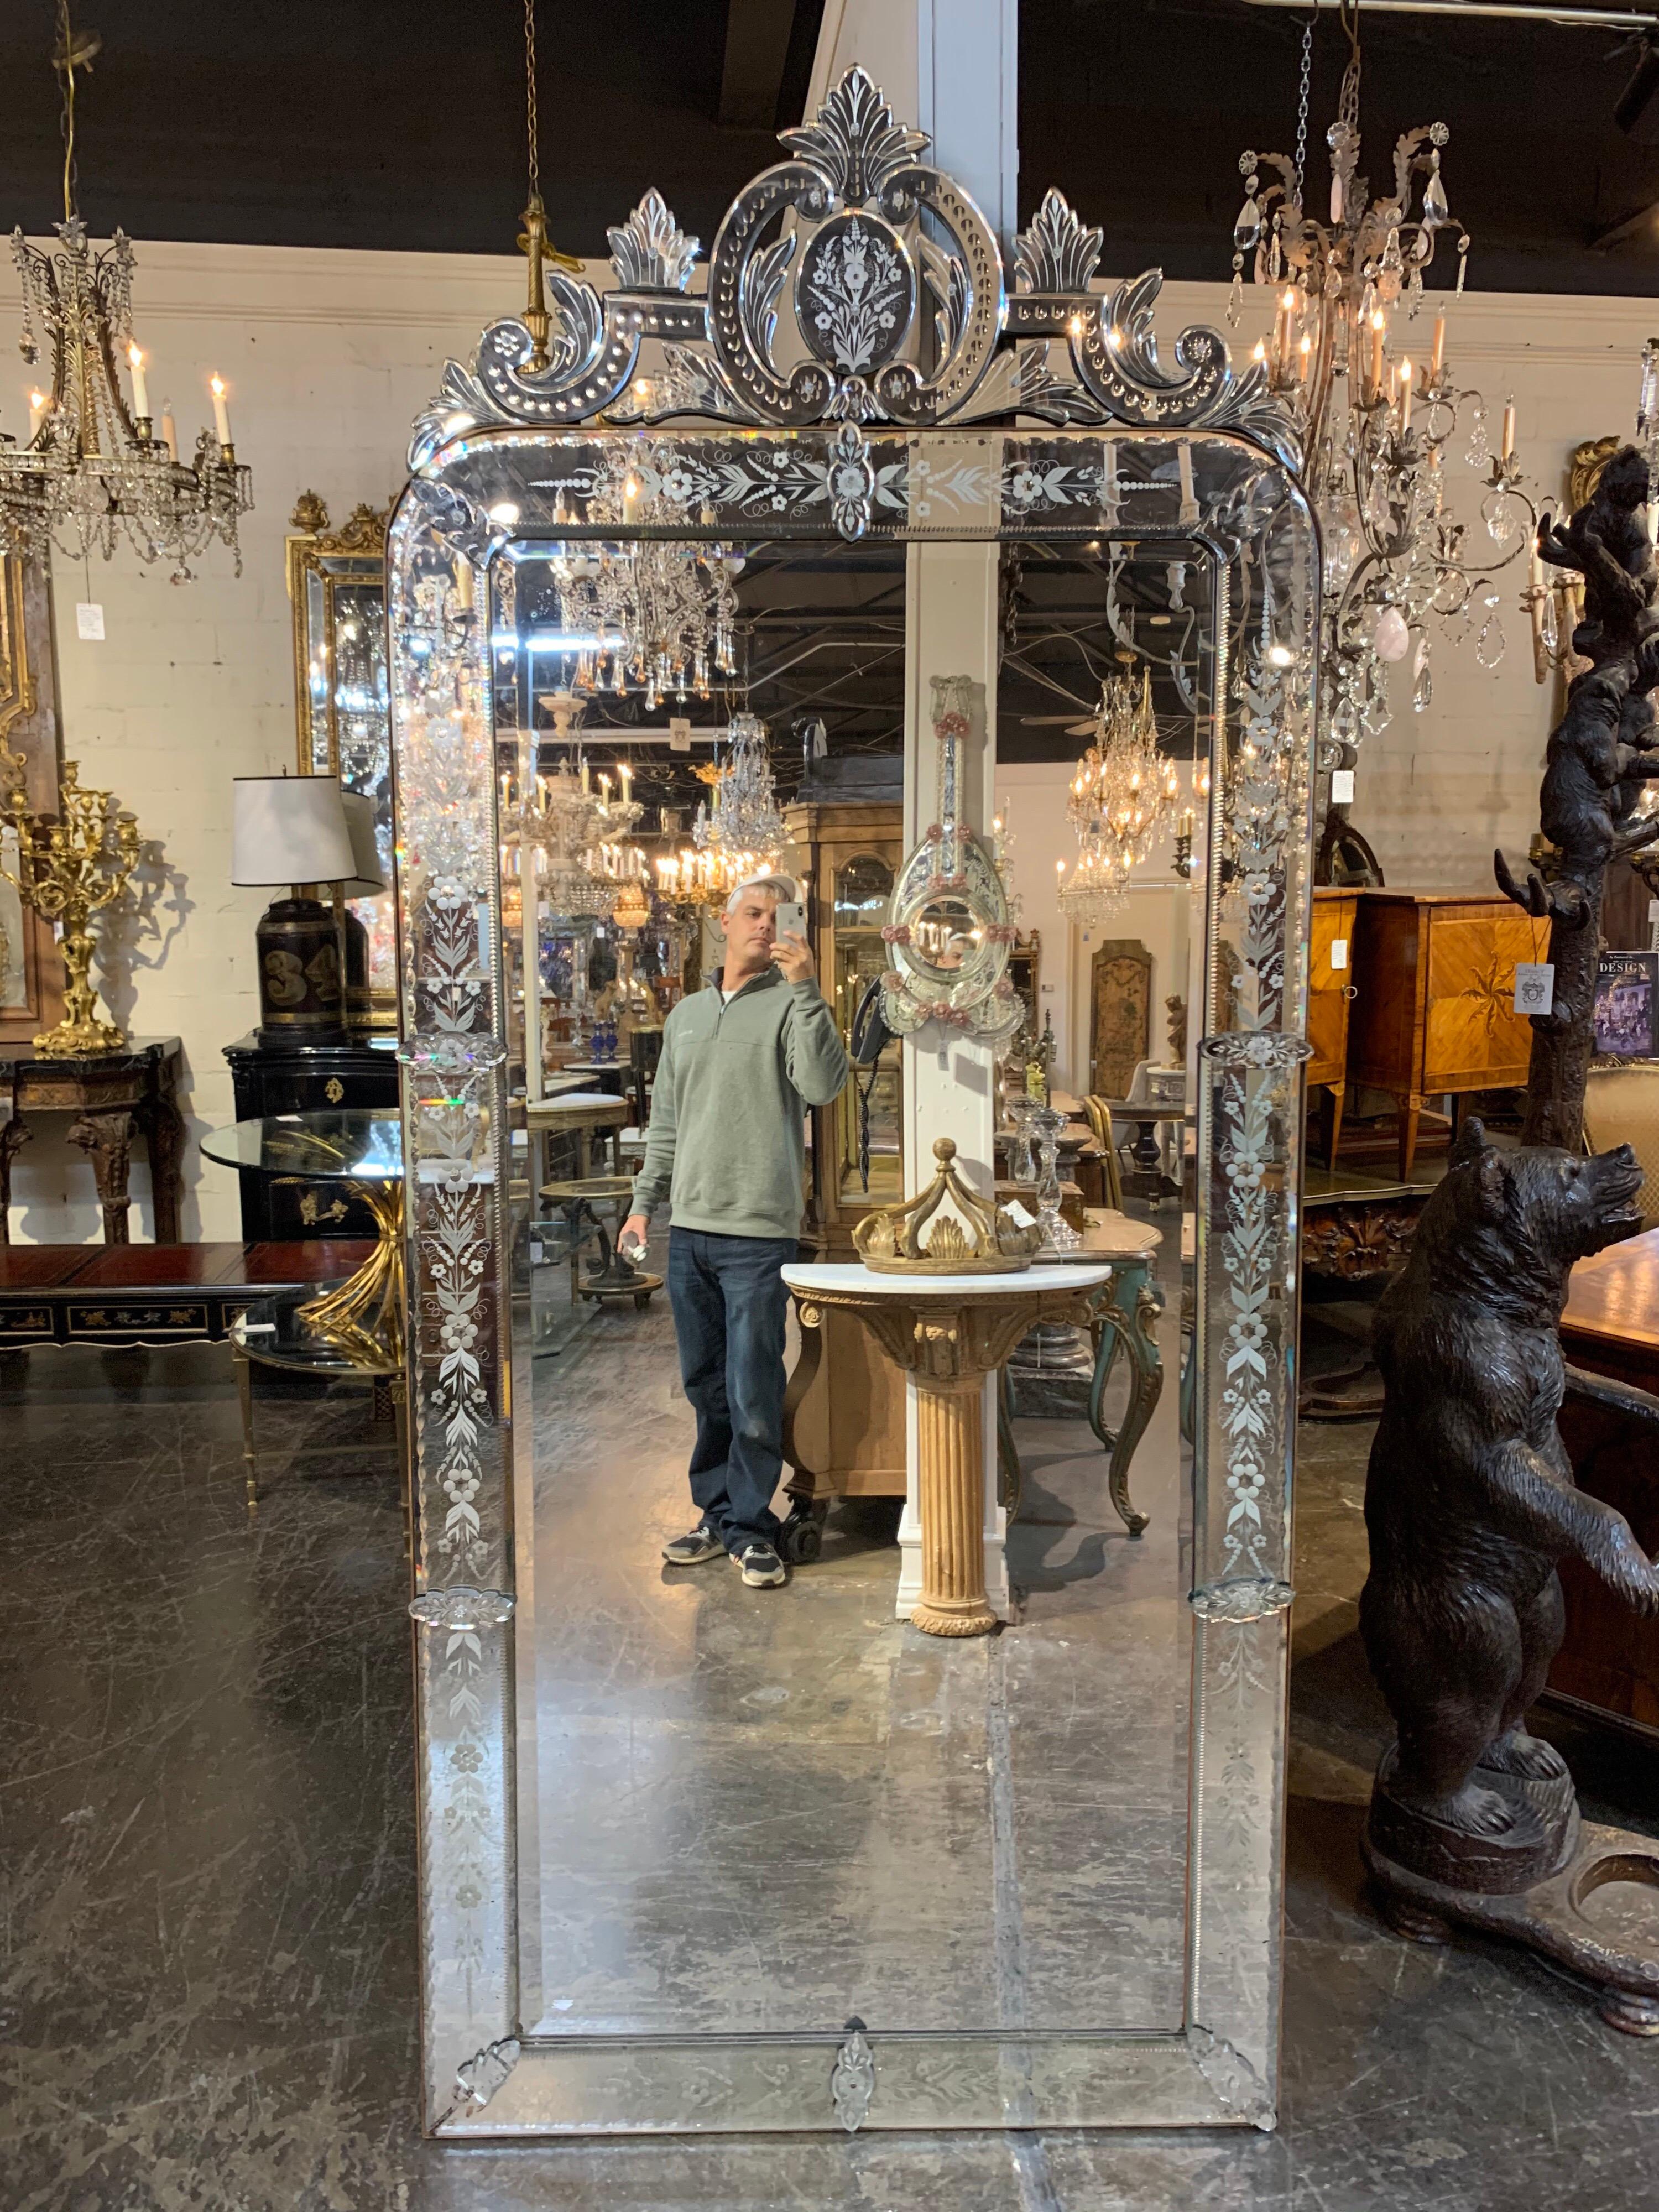 Very fine quality large scale antique Italian mirror from Venice. The mirror has beautiful etched details and lovely crown at the top. Extremely elegant and impressive and hard to find large size. Perfect as a floor mirror with plenty of height! All